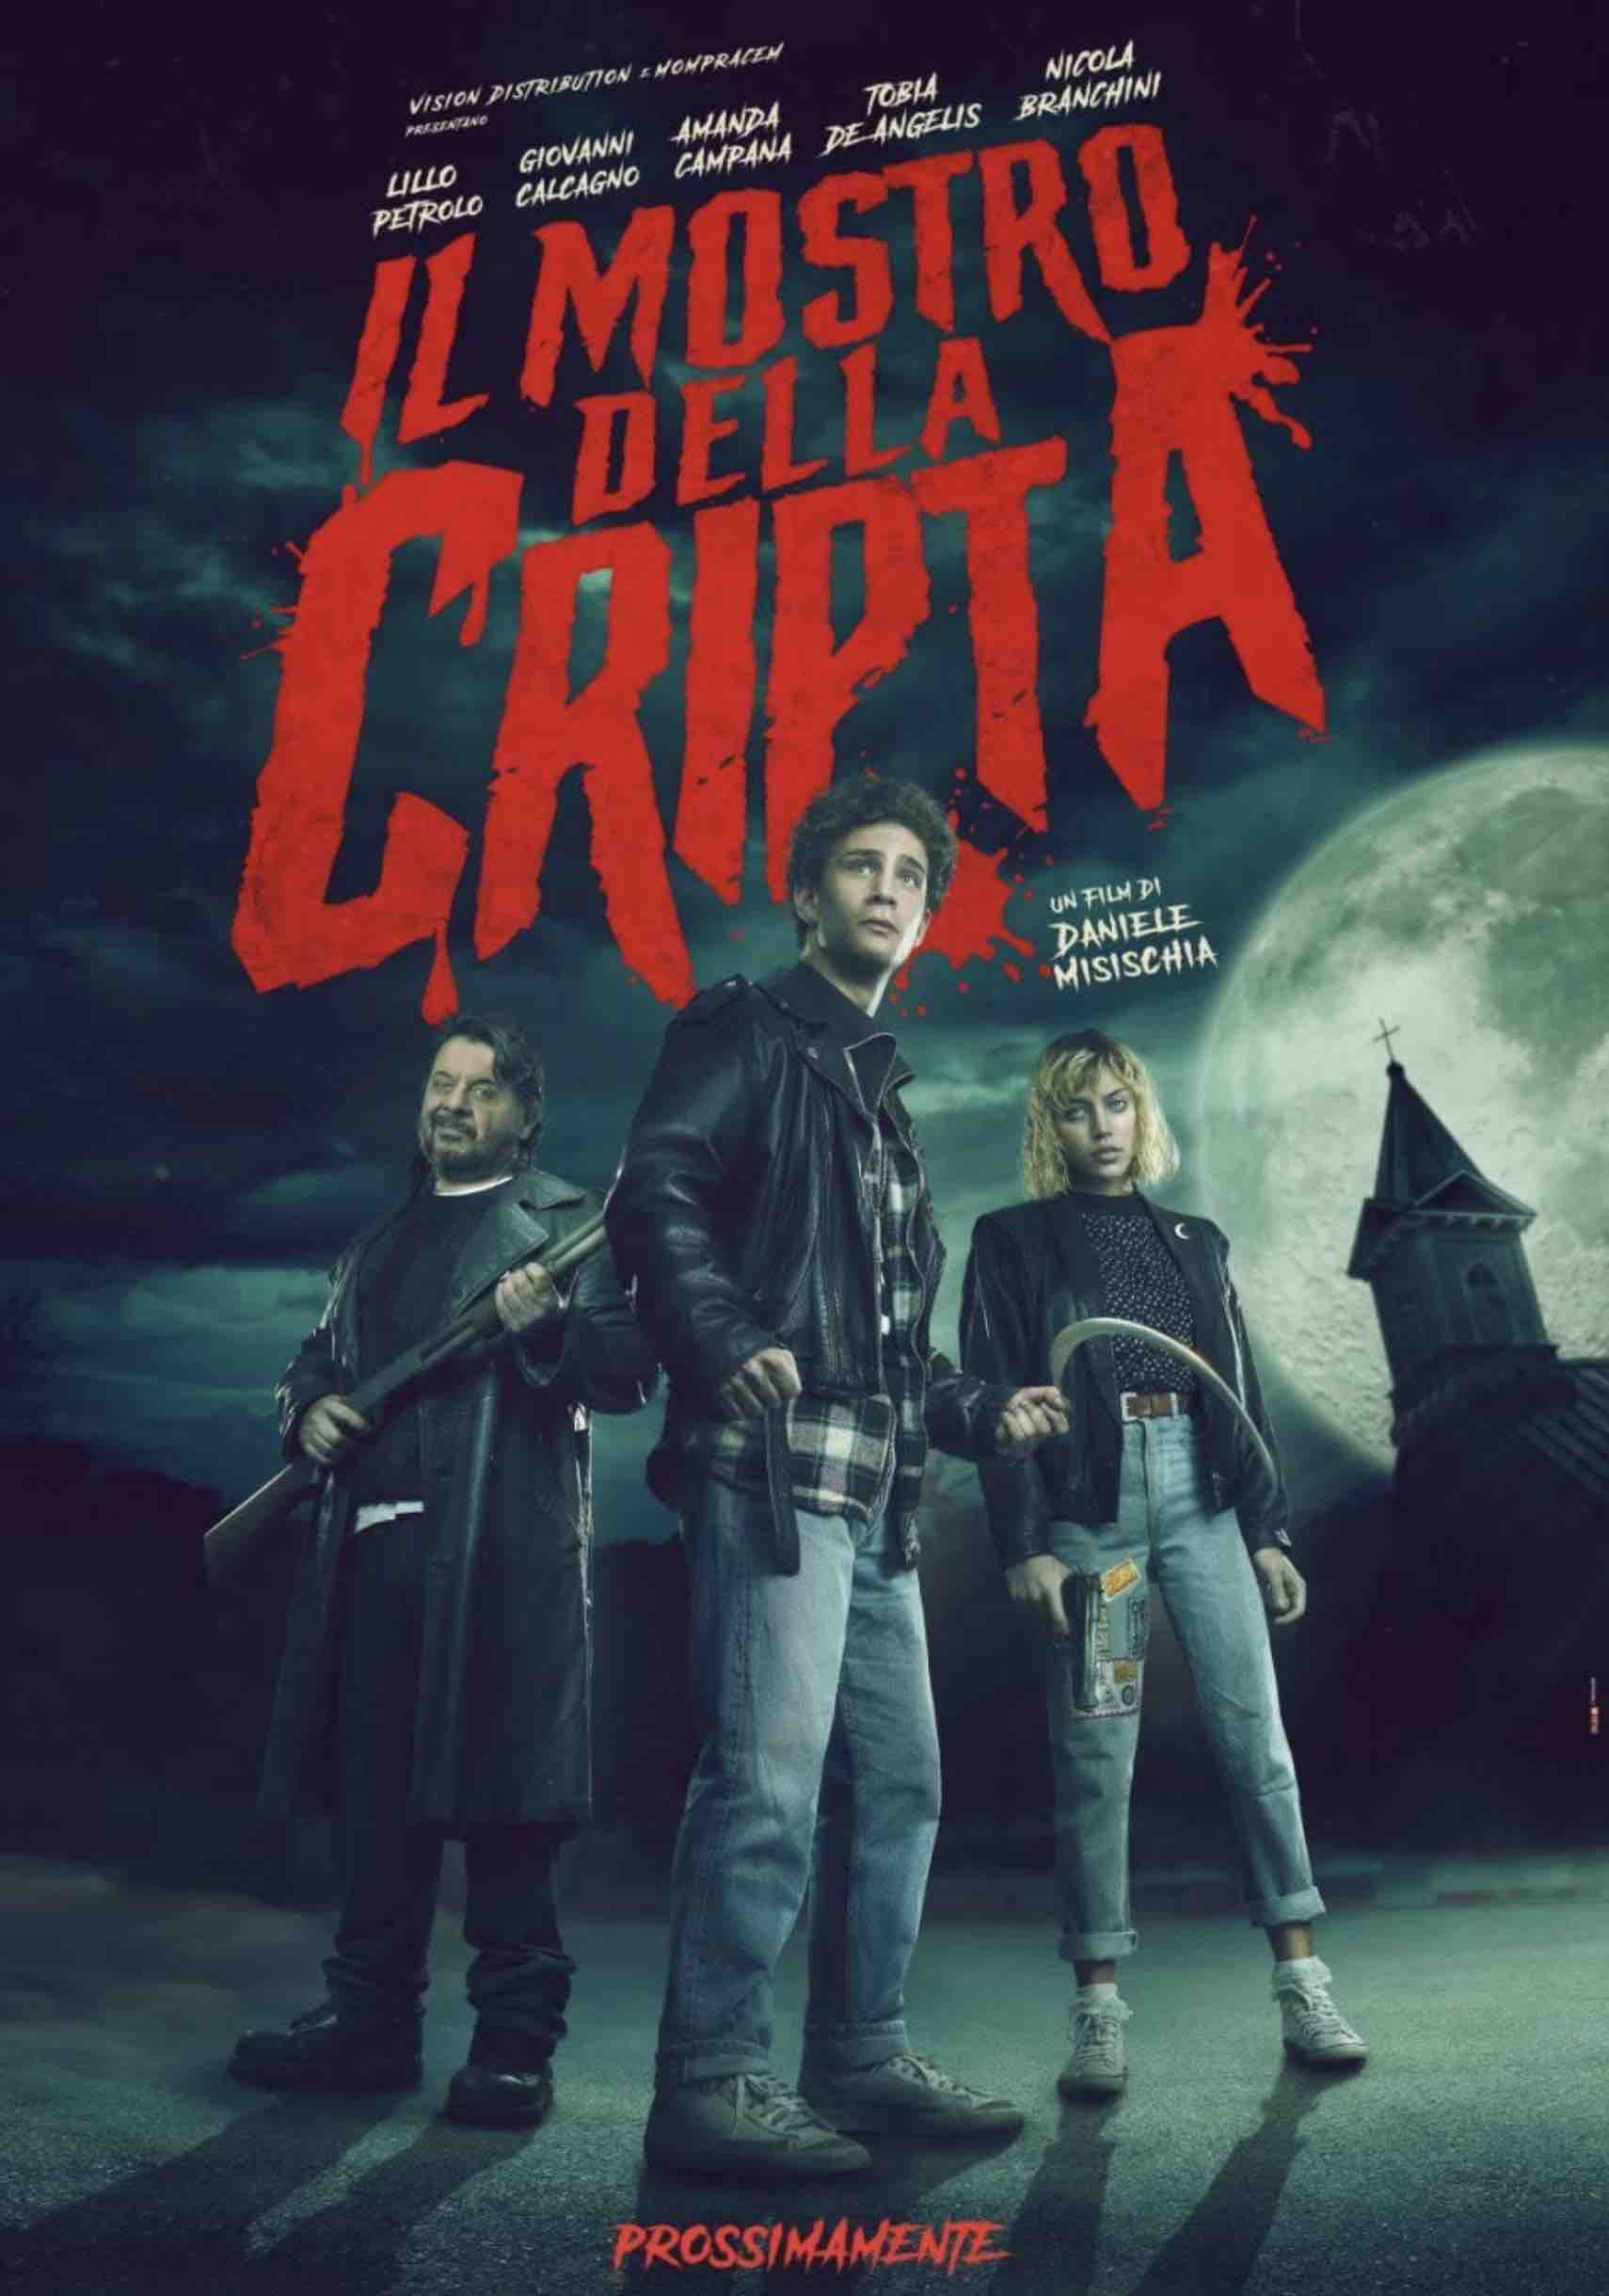 The Crypt Monster 2021 Review And Overview Of Italian Horror Movies And Mania